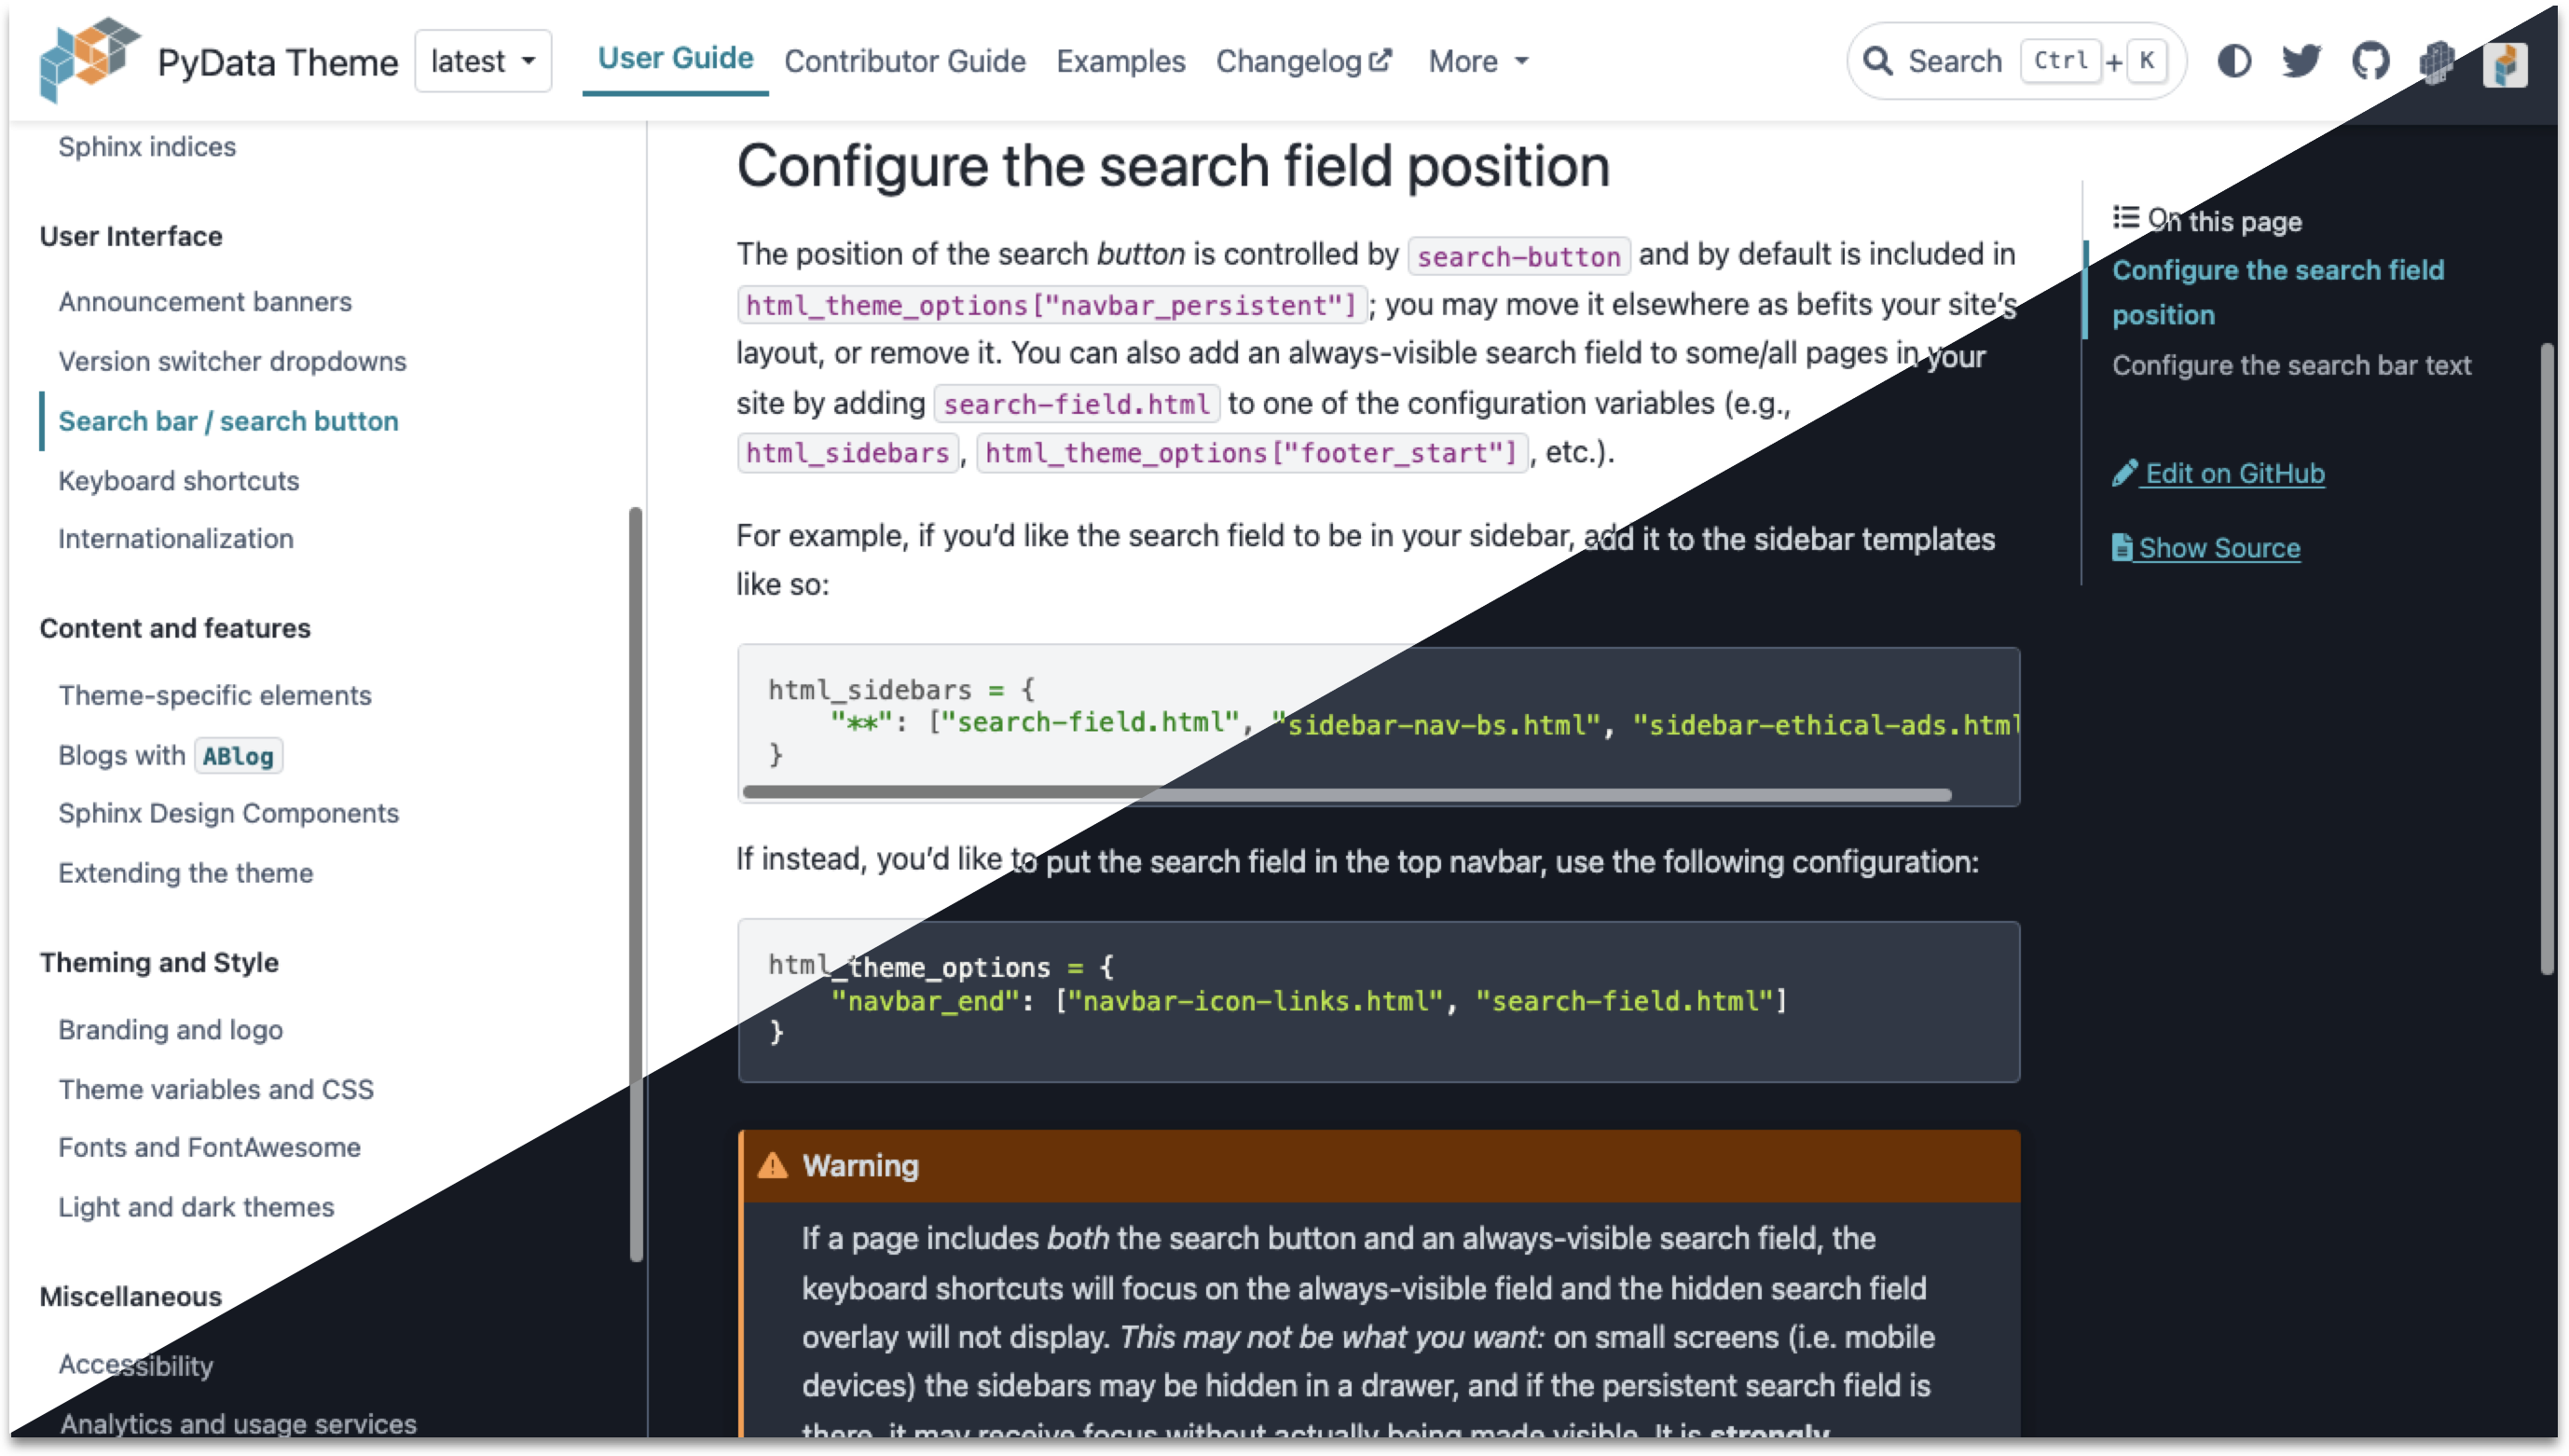 PyData theme - Configure the search position demo image showcasing both the light and dark theme in a single image.